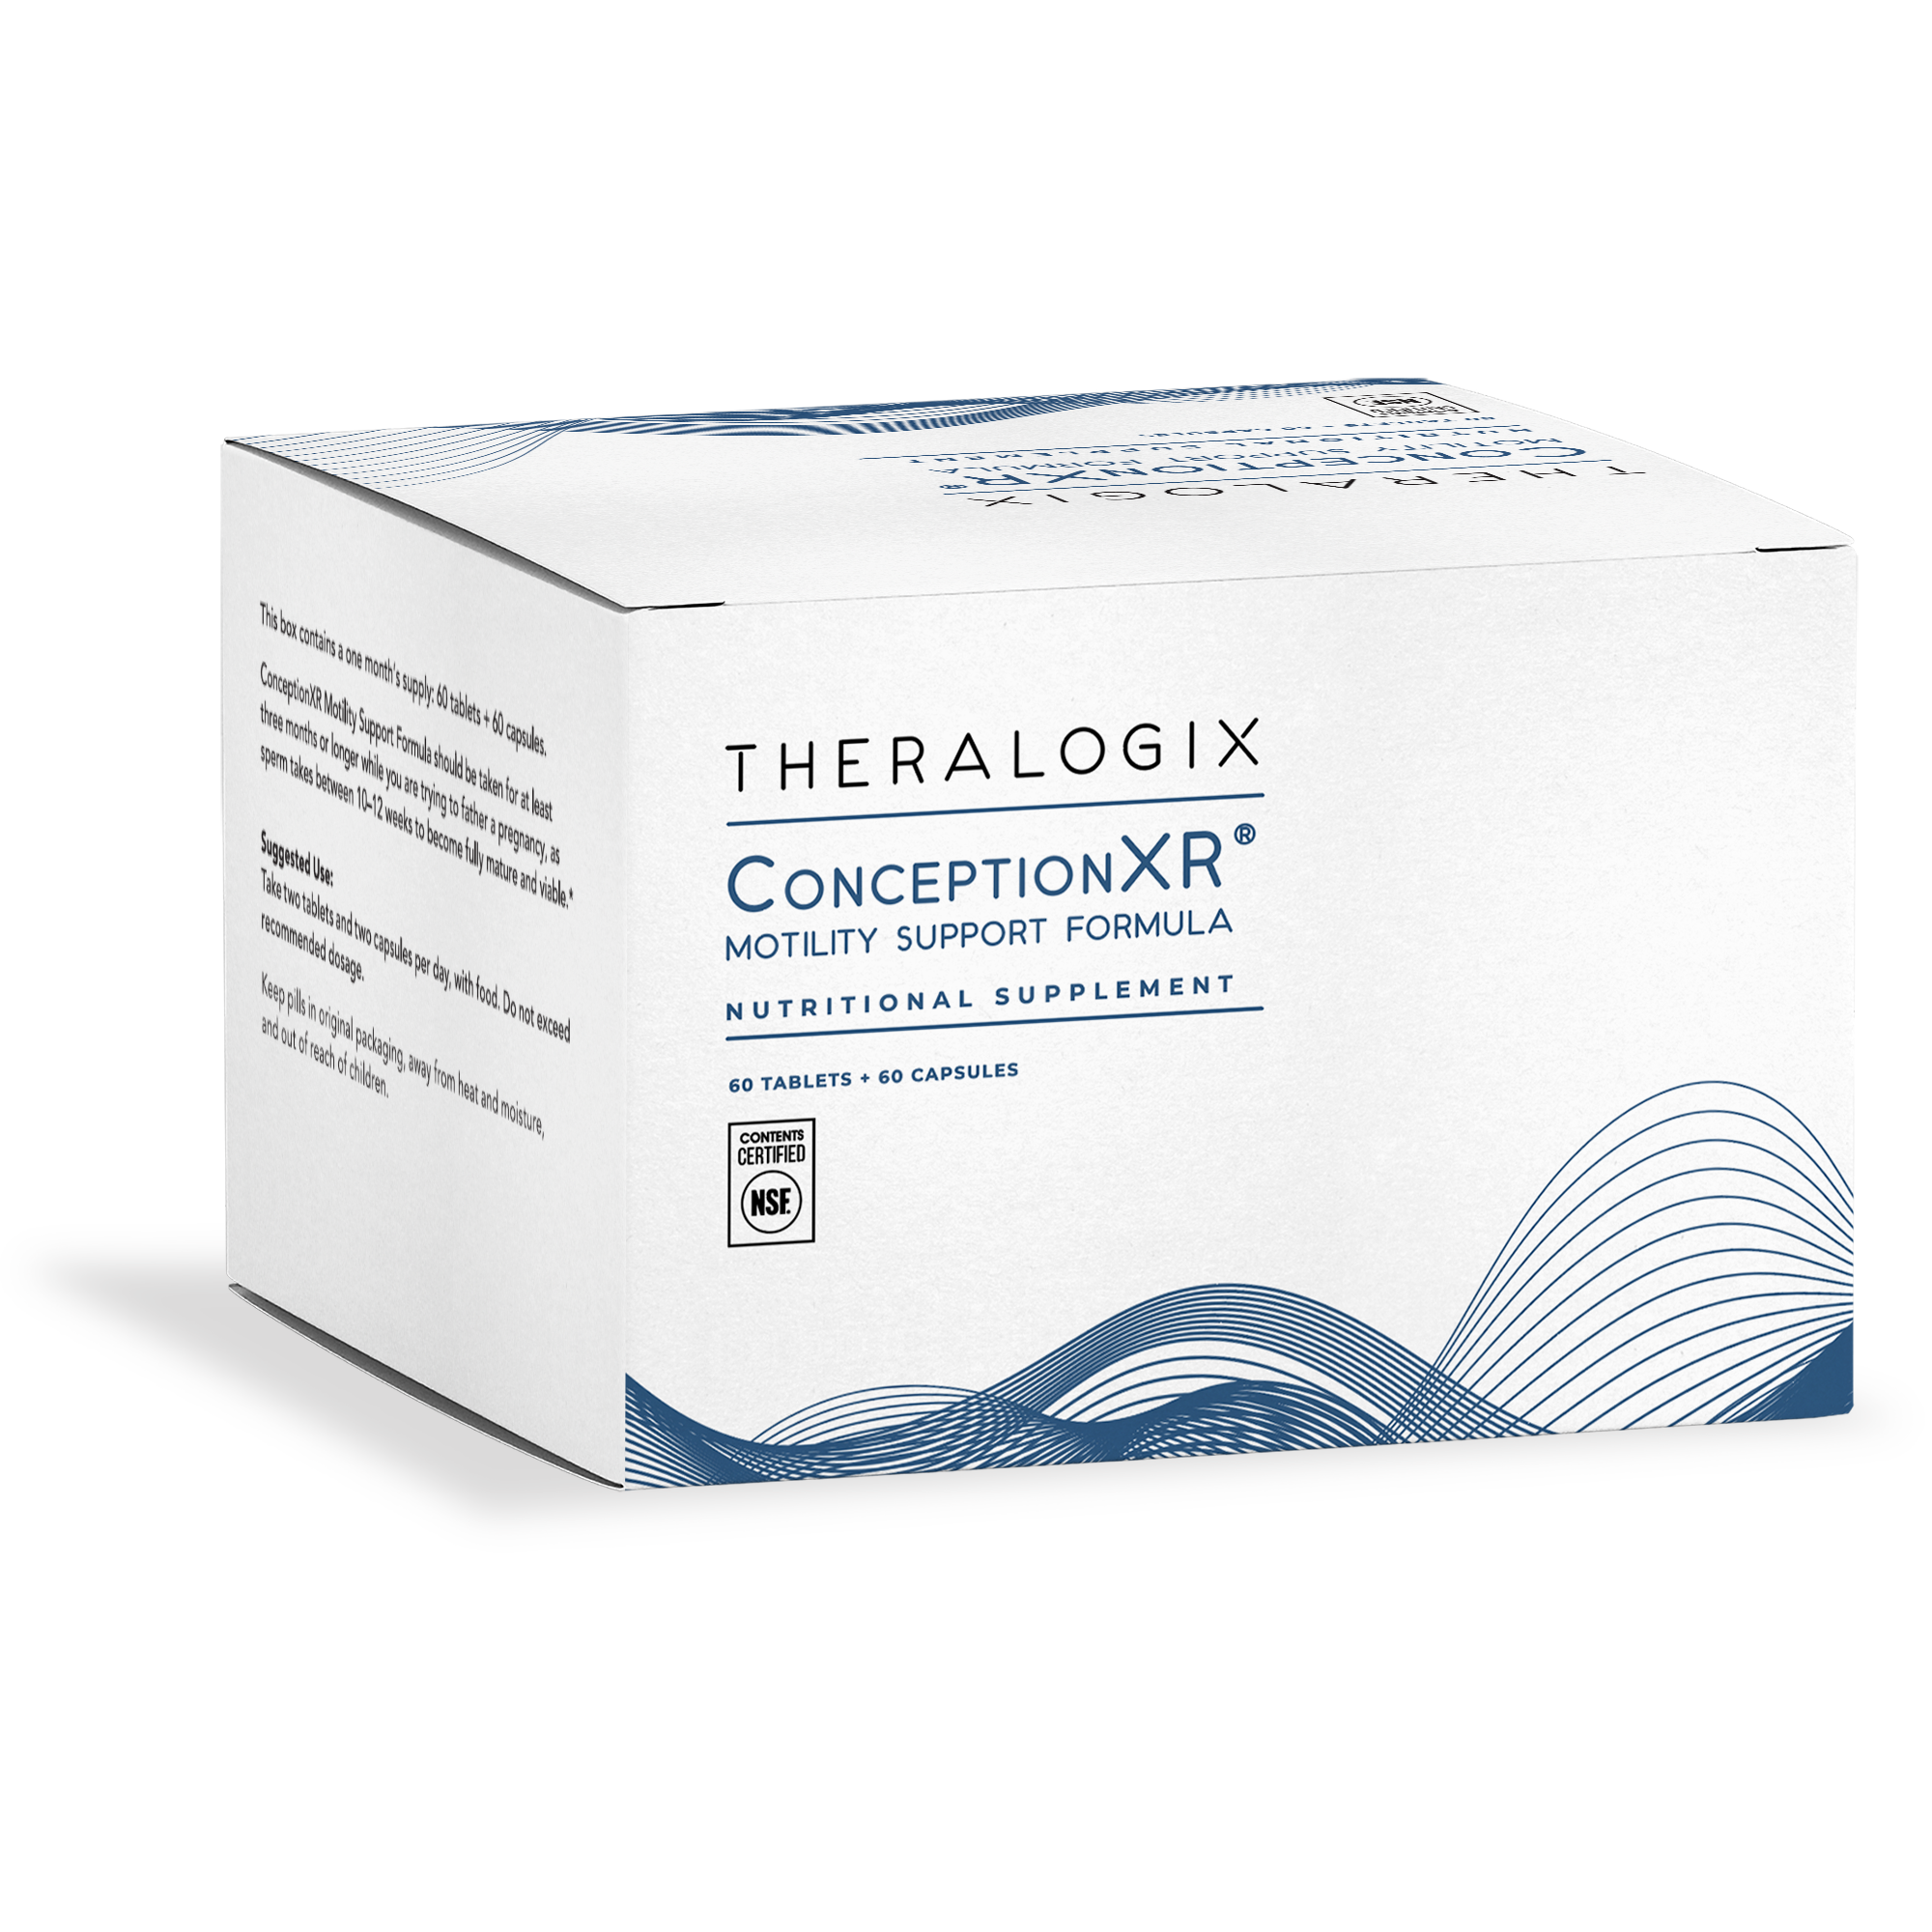 ConceptionXR® Motility Support Formula (Ships from the US, arrives in 11-14 days)